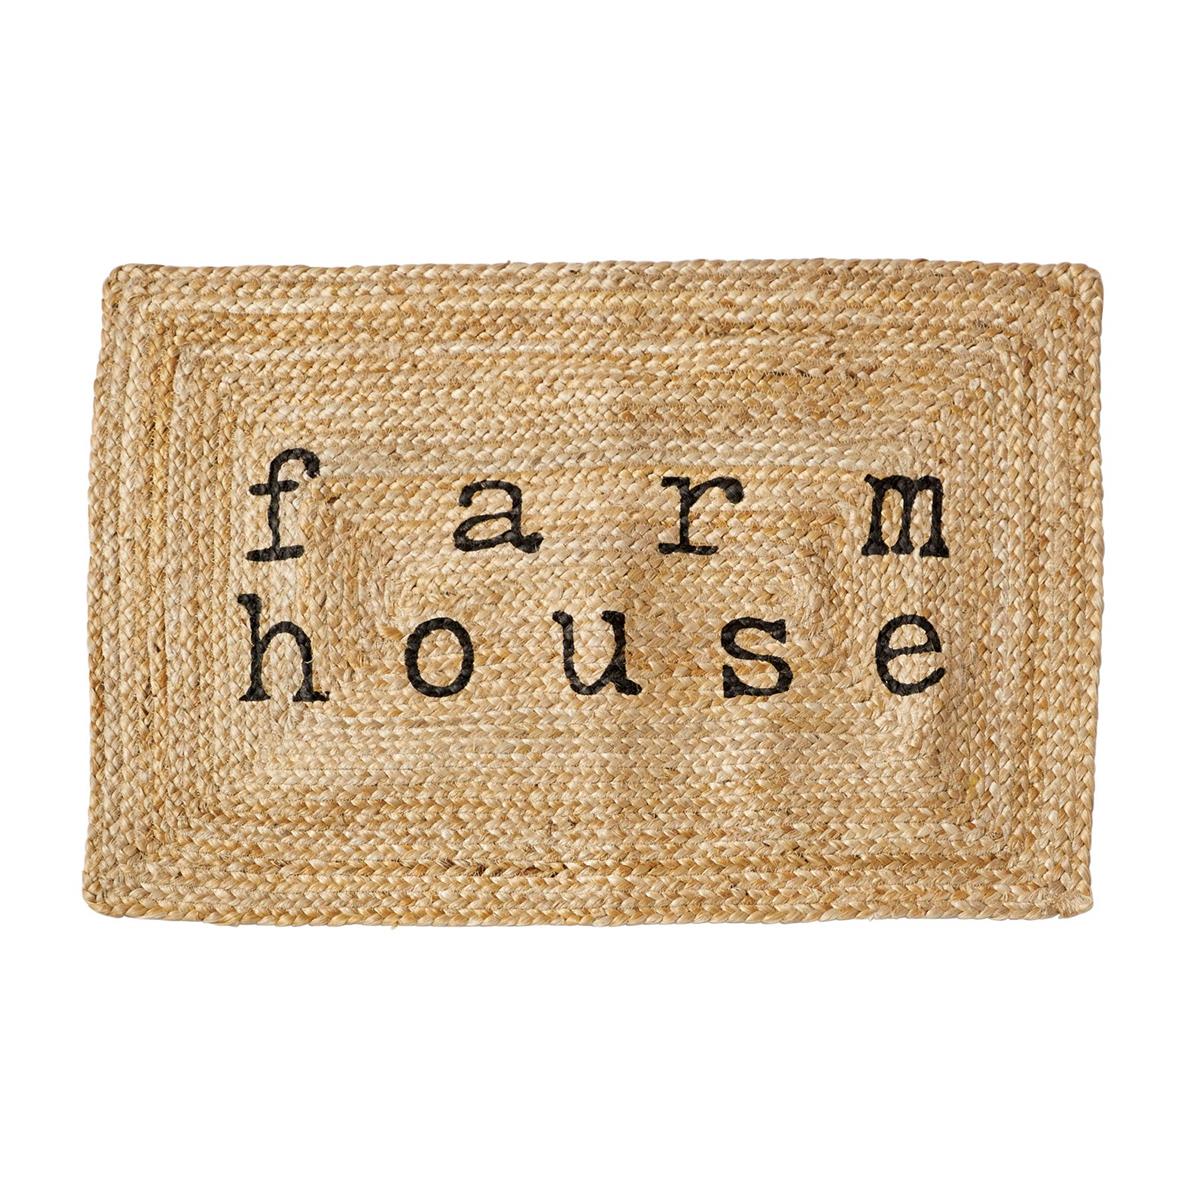 Farmhouse Style Welcome Home Doormat